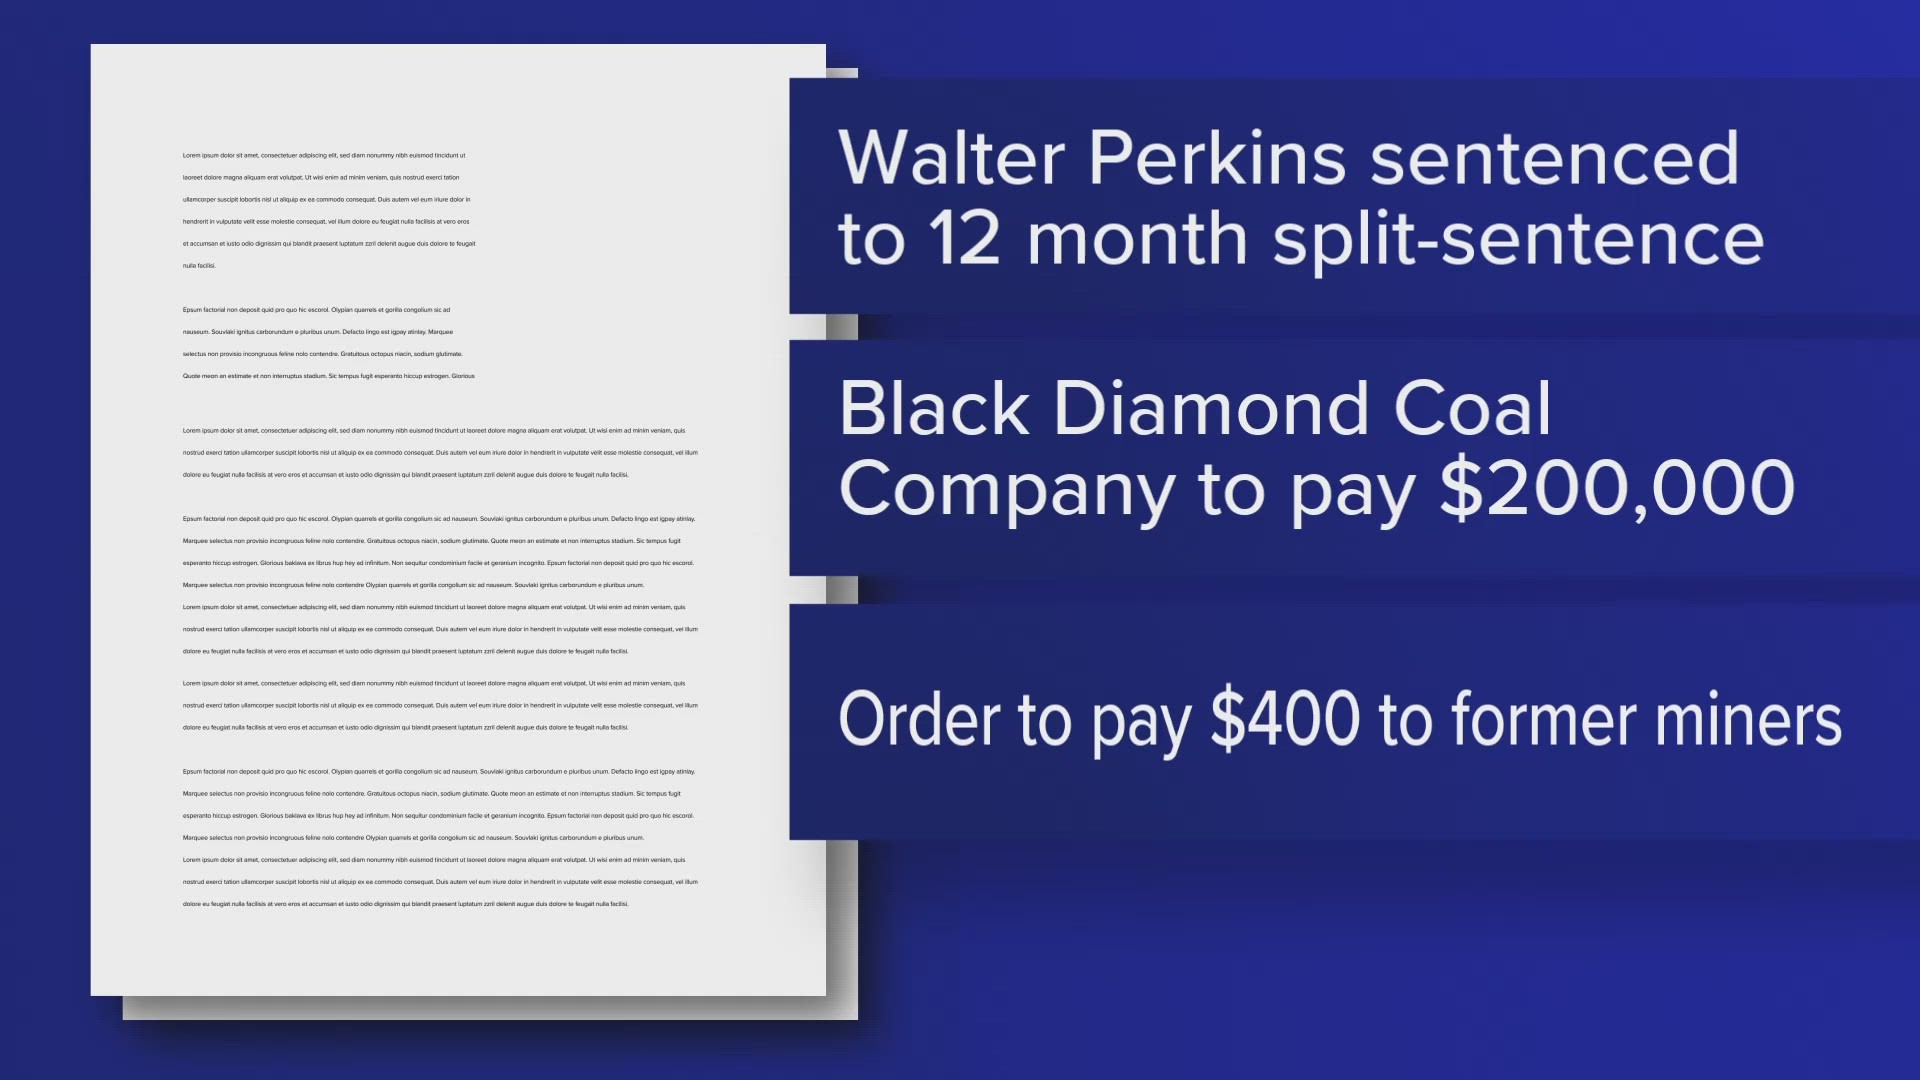 The U.S. Attorney's Office in Eastern Kentucky said a Black Diamond employee lied to special investigators about dust samples used to prevent "black lung" disease.